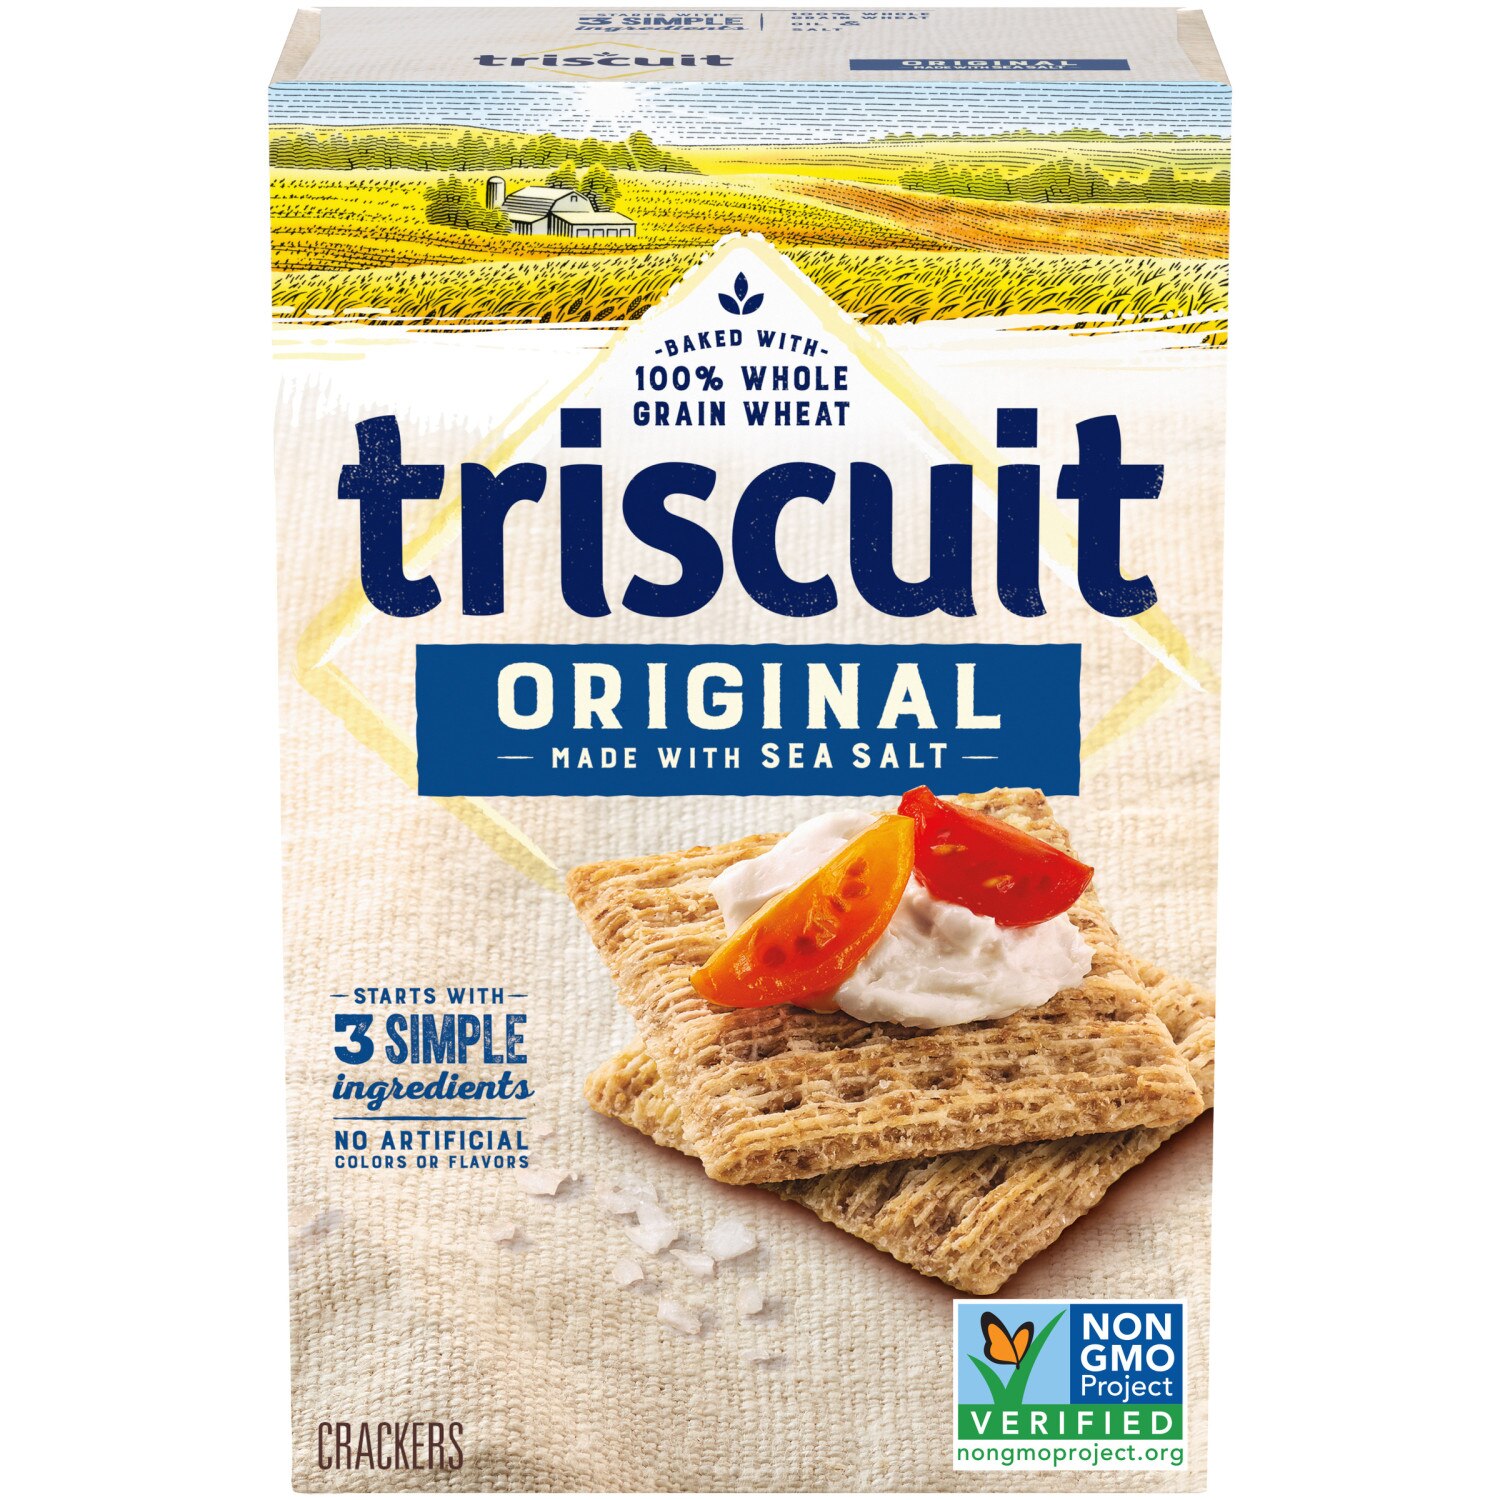 Nabisco Triscuit Crackers, Baked Whole Grain Wheat, Original